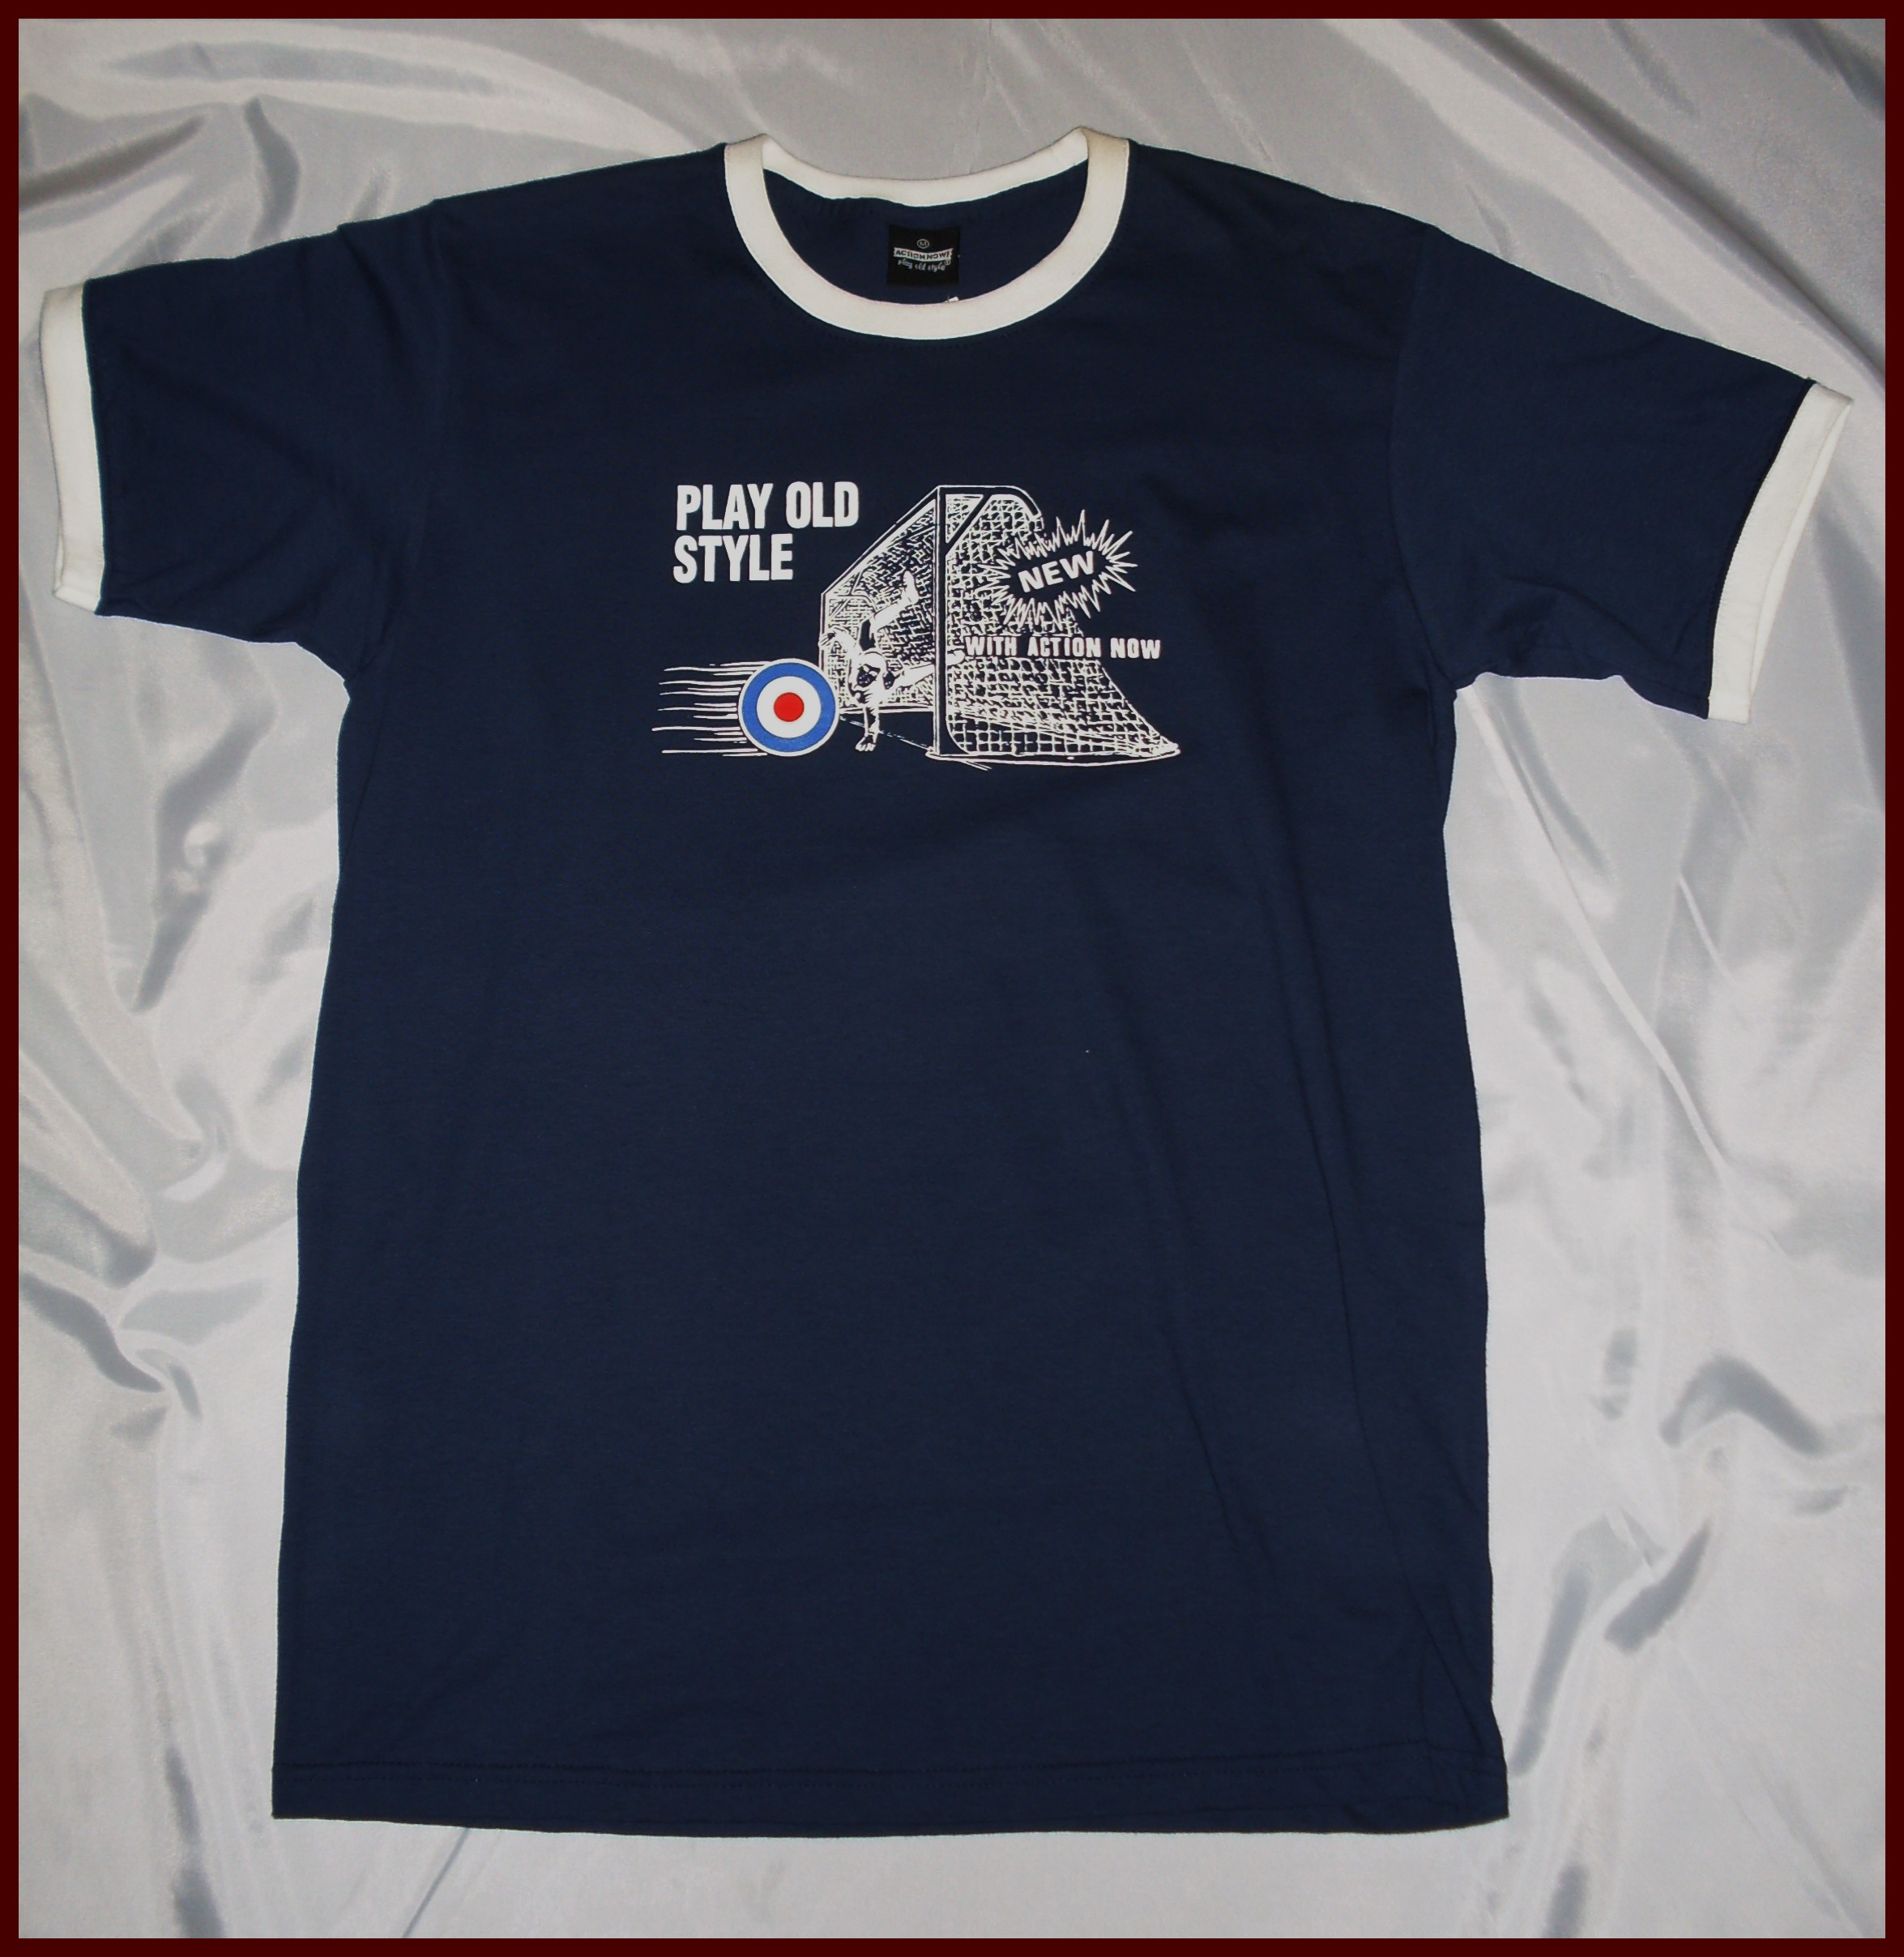 T-Shirt "Play Old Style" navy-white